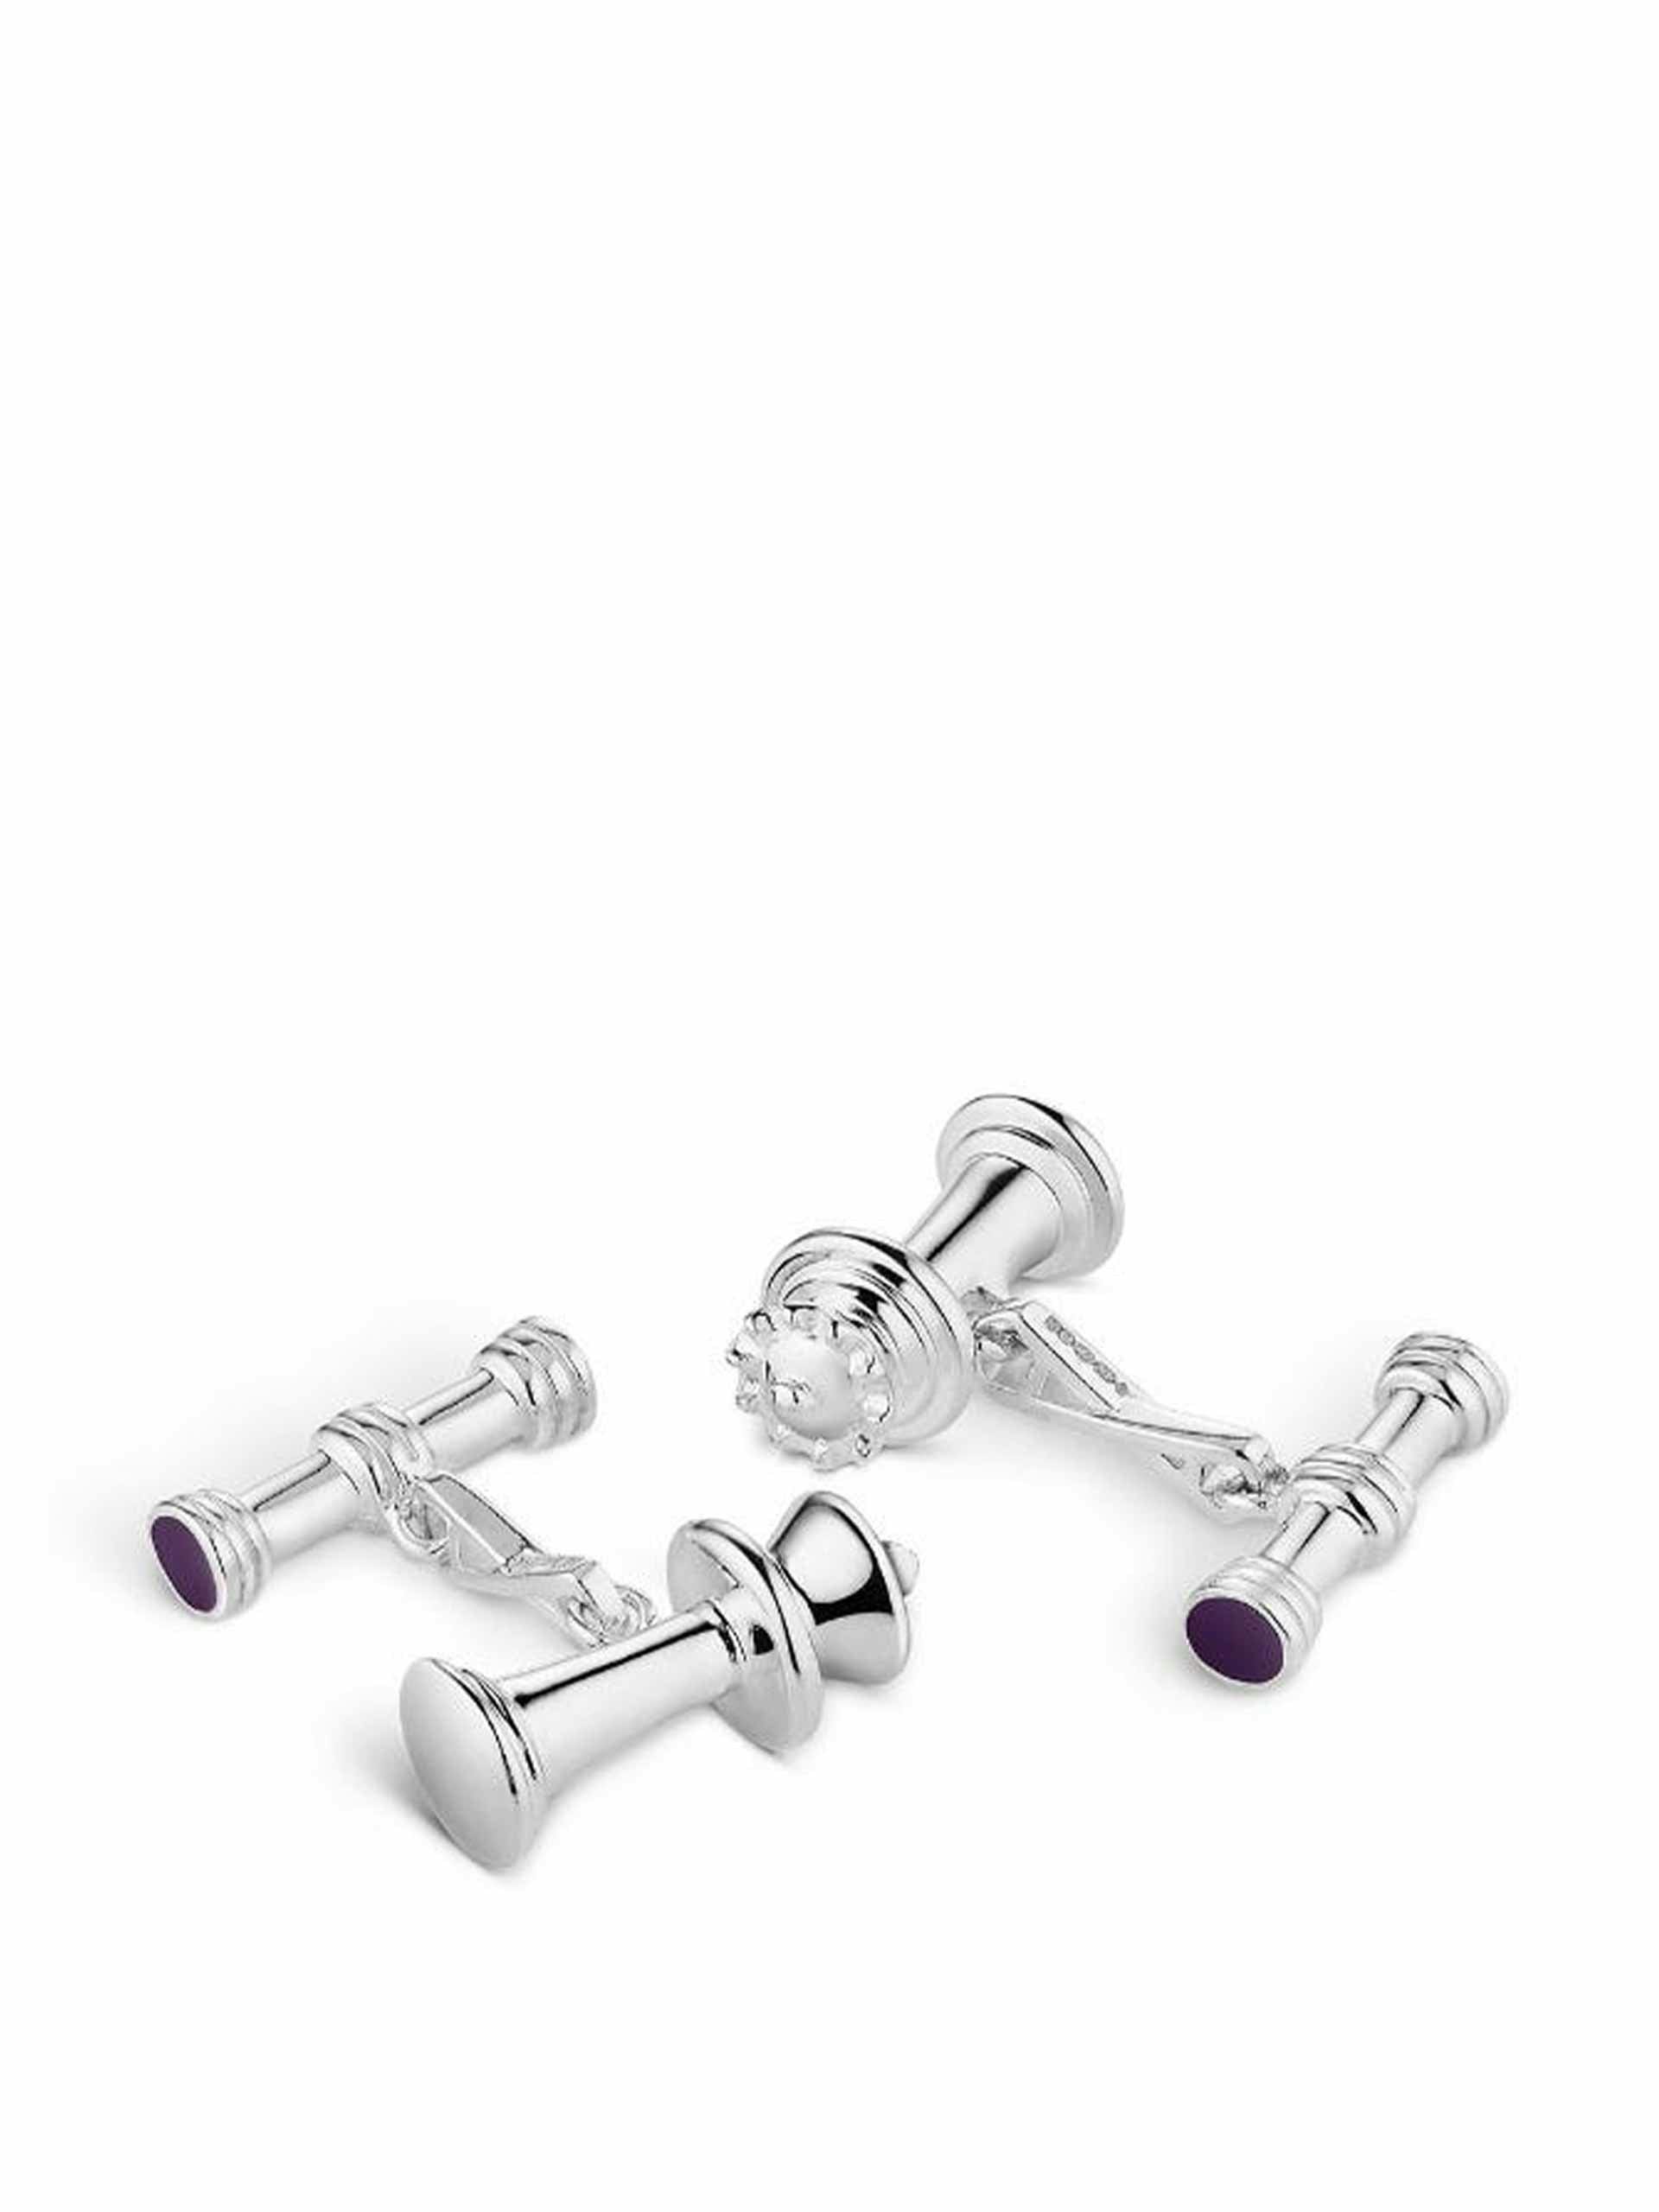 King and Queen silver cufflinks